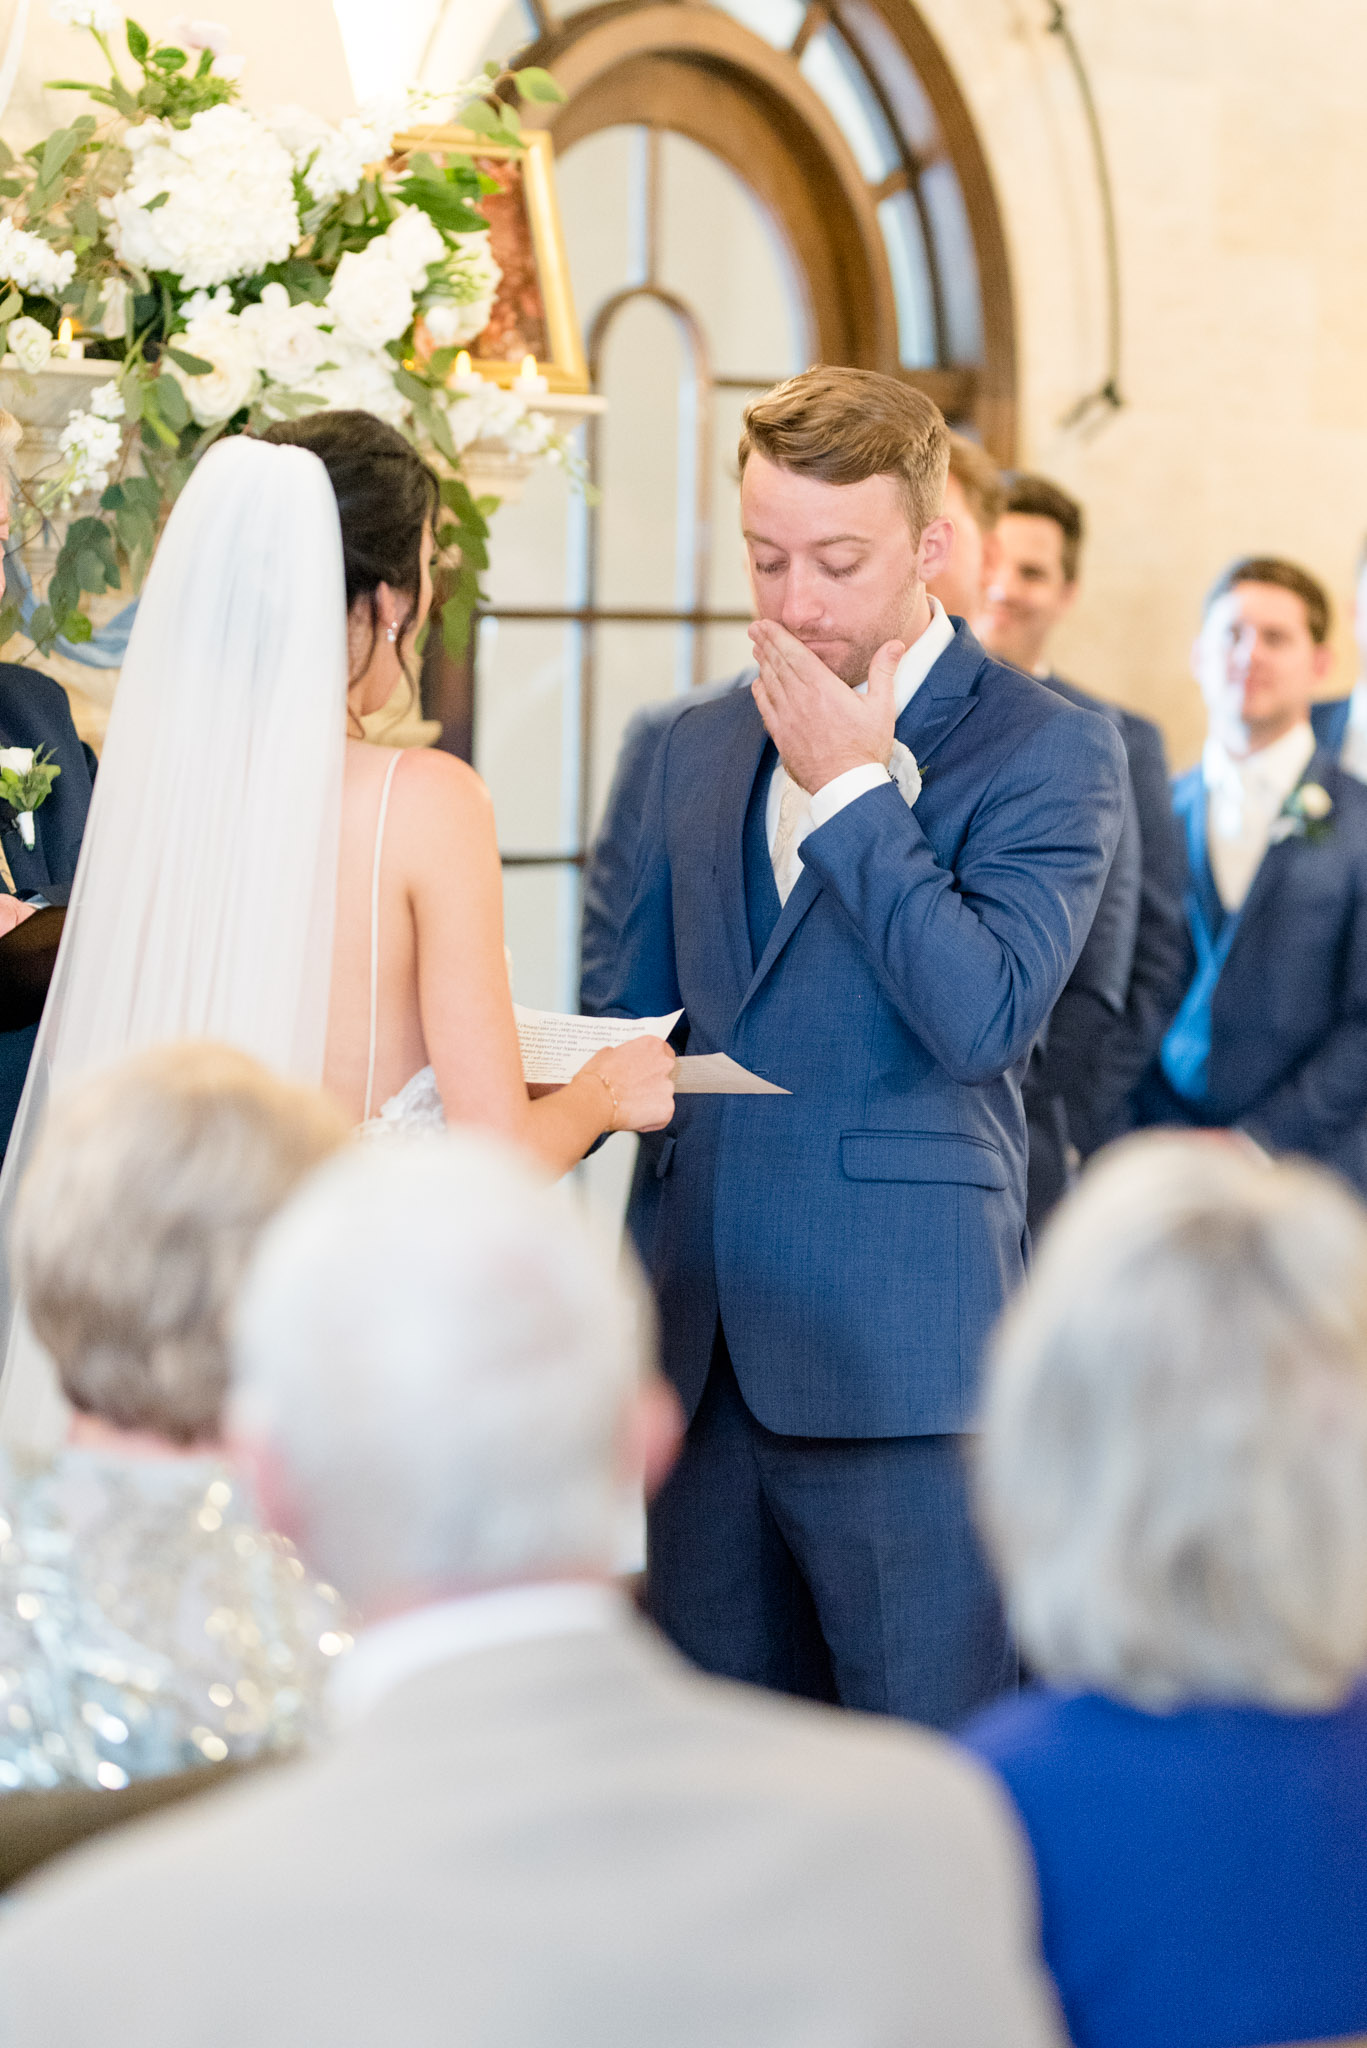 Groom cries during ceremony.